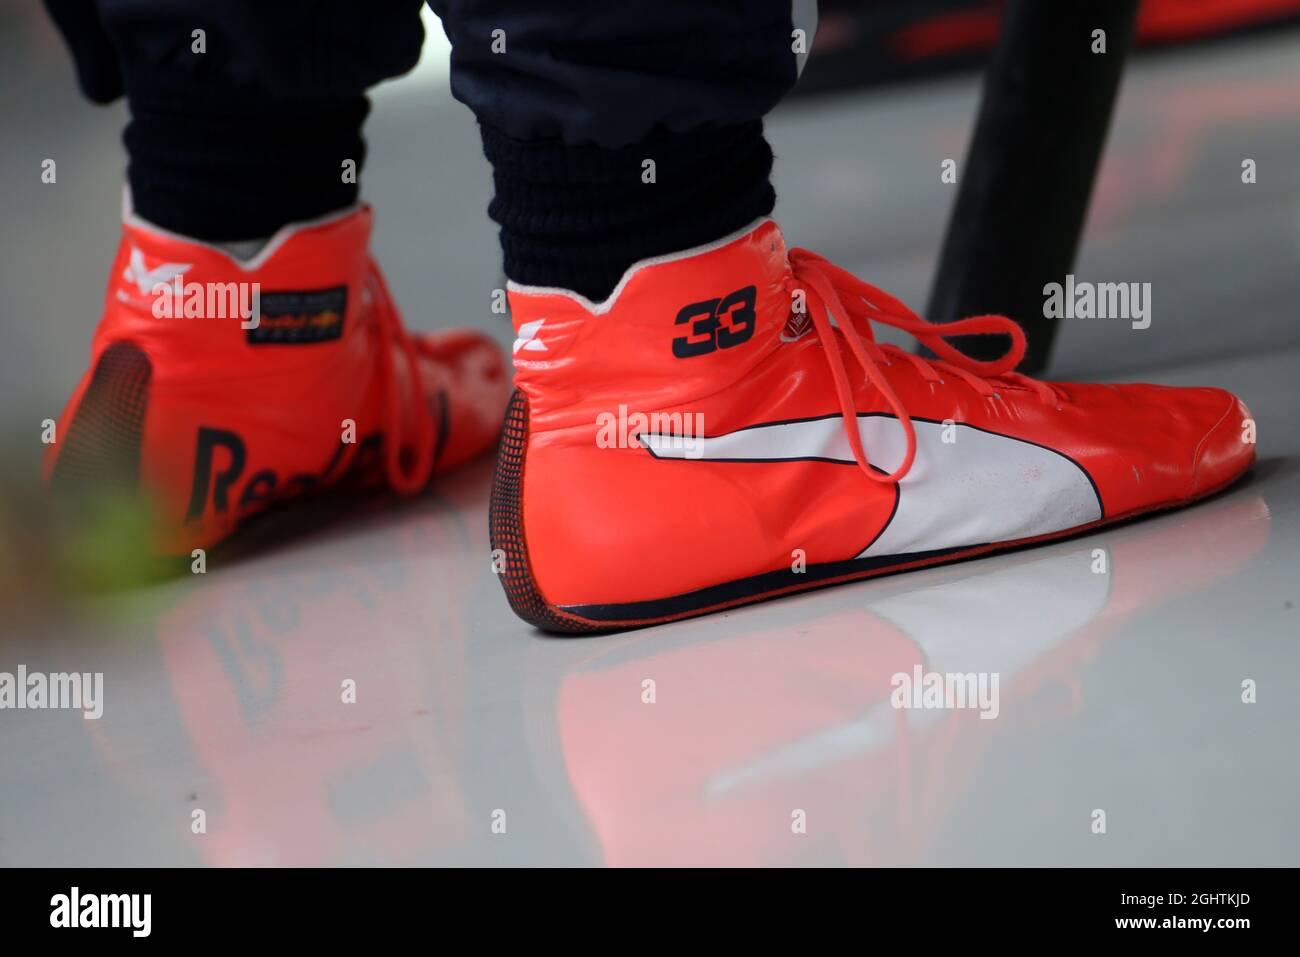 Racing boots of Max Verstappen (NED) Red Bull Racing